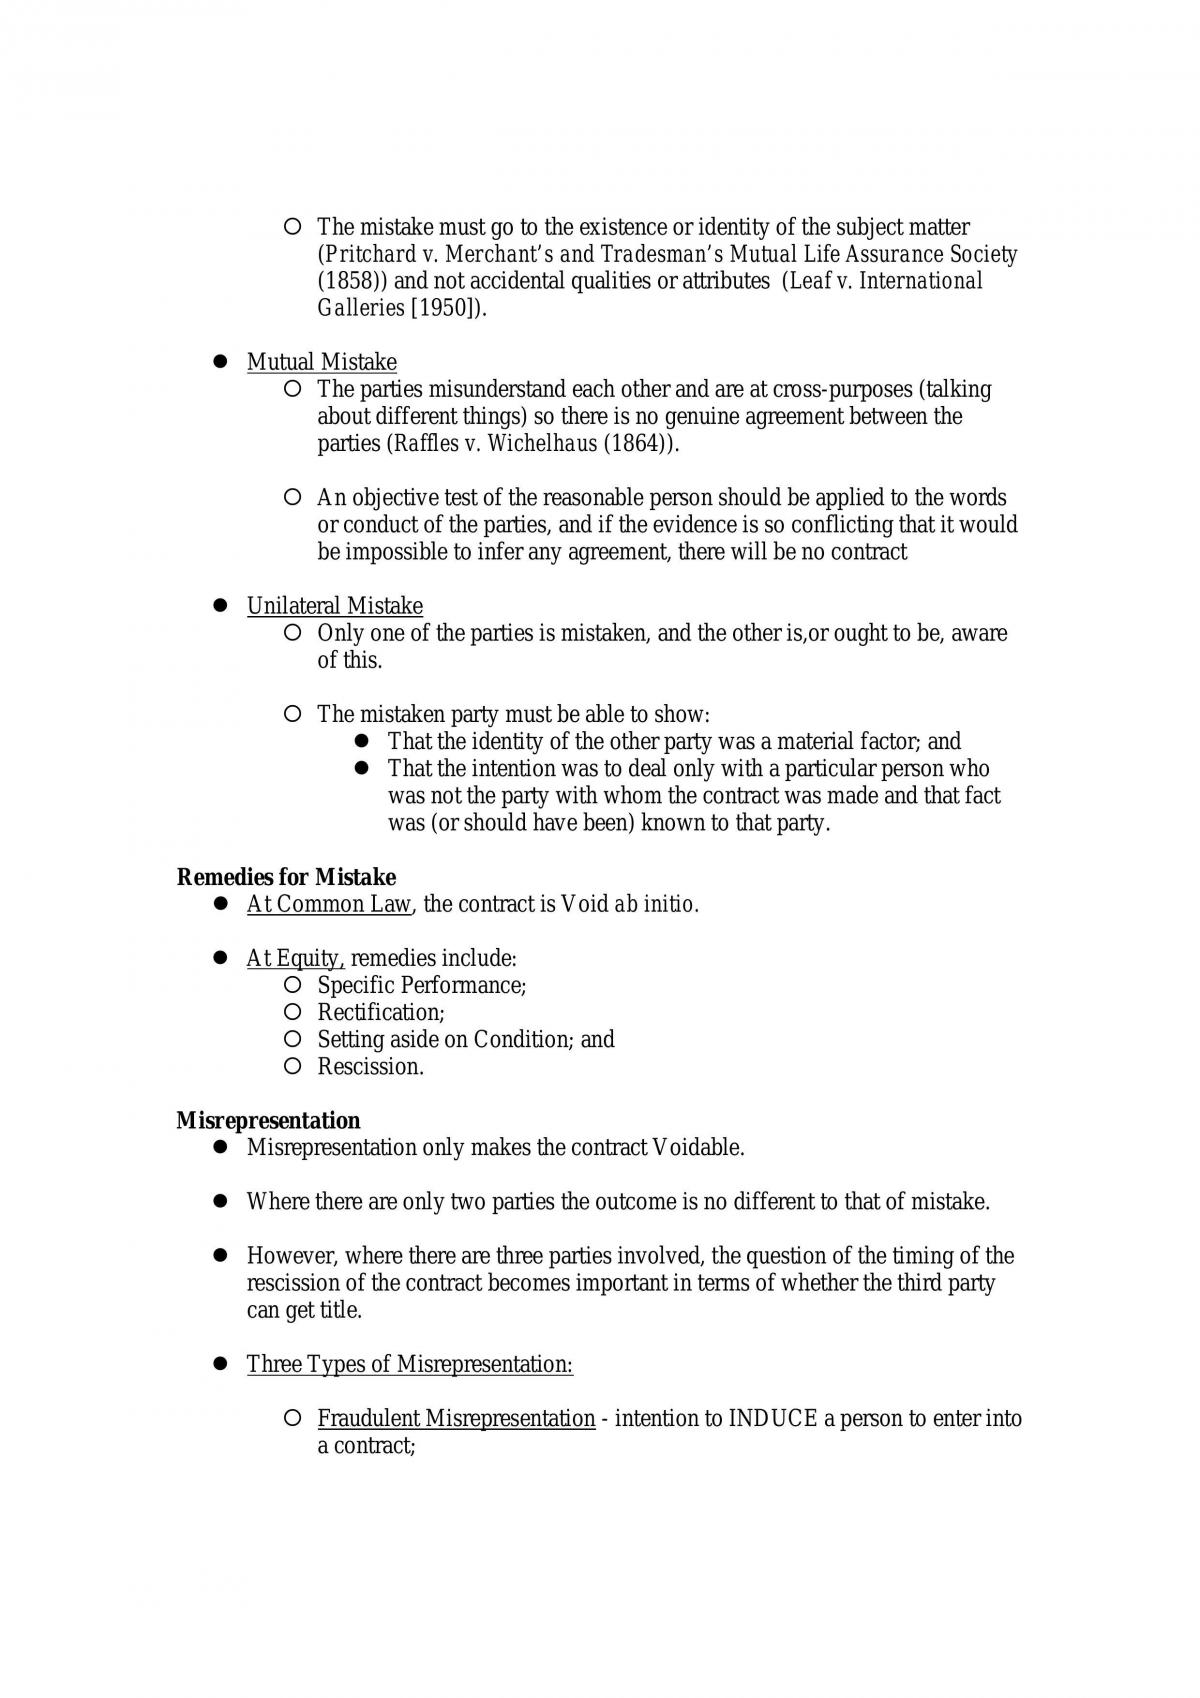 Blethics Revision. Main Points Of The Lectures With Additional Points And Tables Included. - Page 15